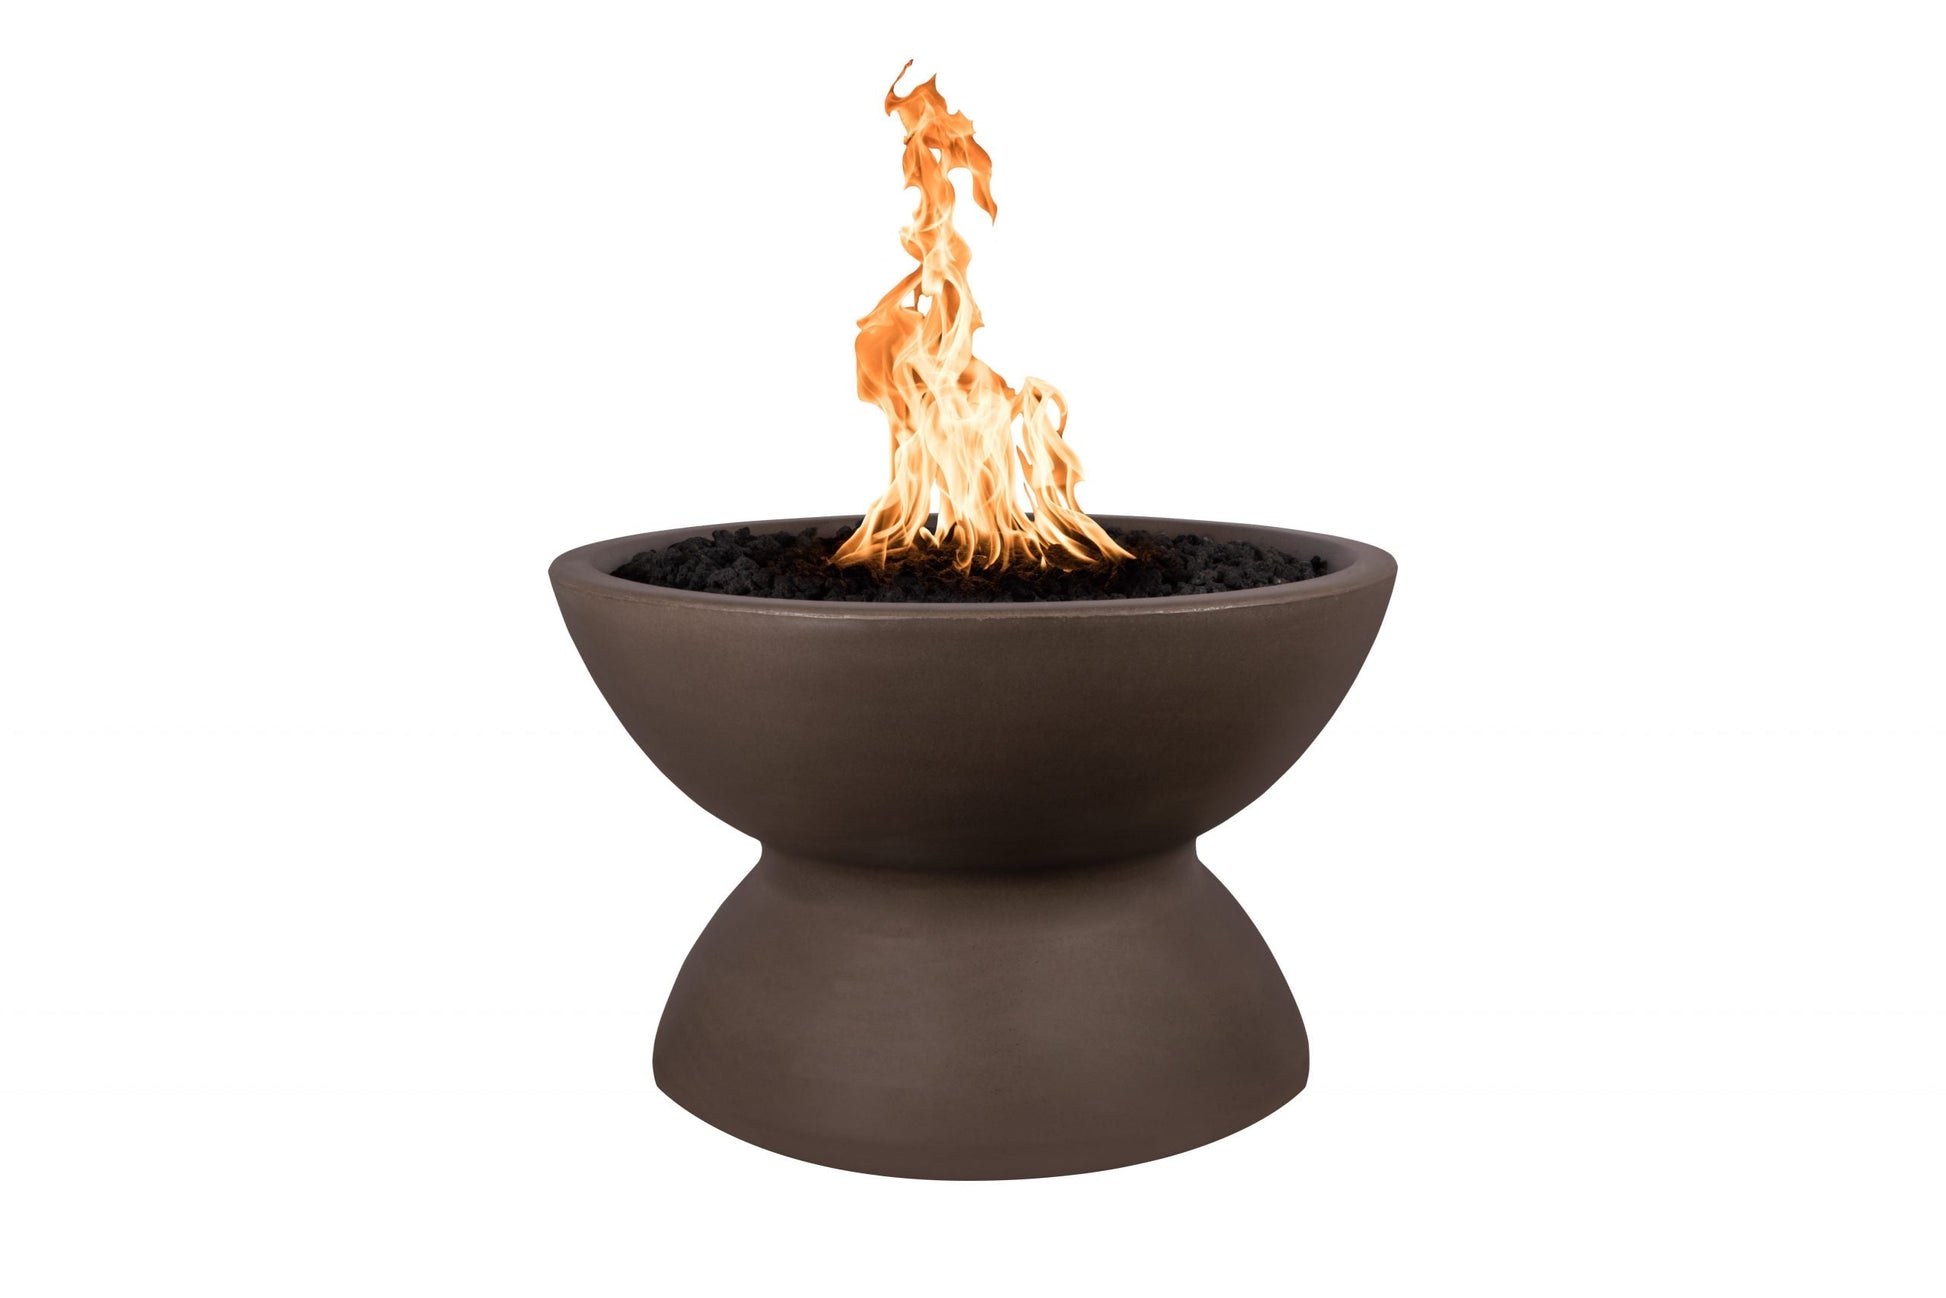 The Outdoor Plus Round Copa 33" Rustic Moss Stone GFRC Concrete Natural Gas Fire Pit with 110V Electronic Ignition